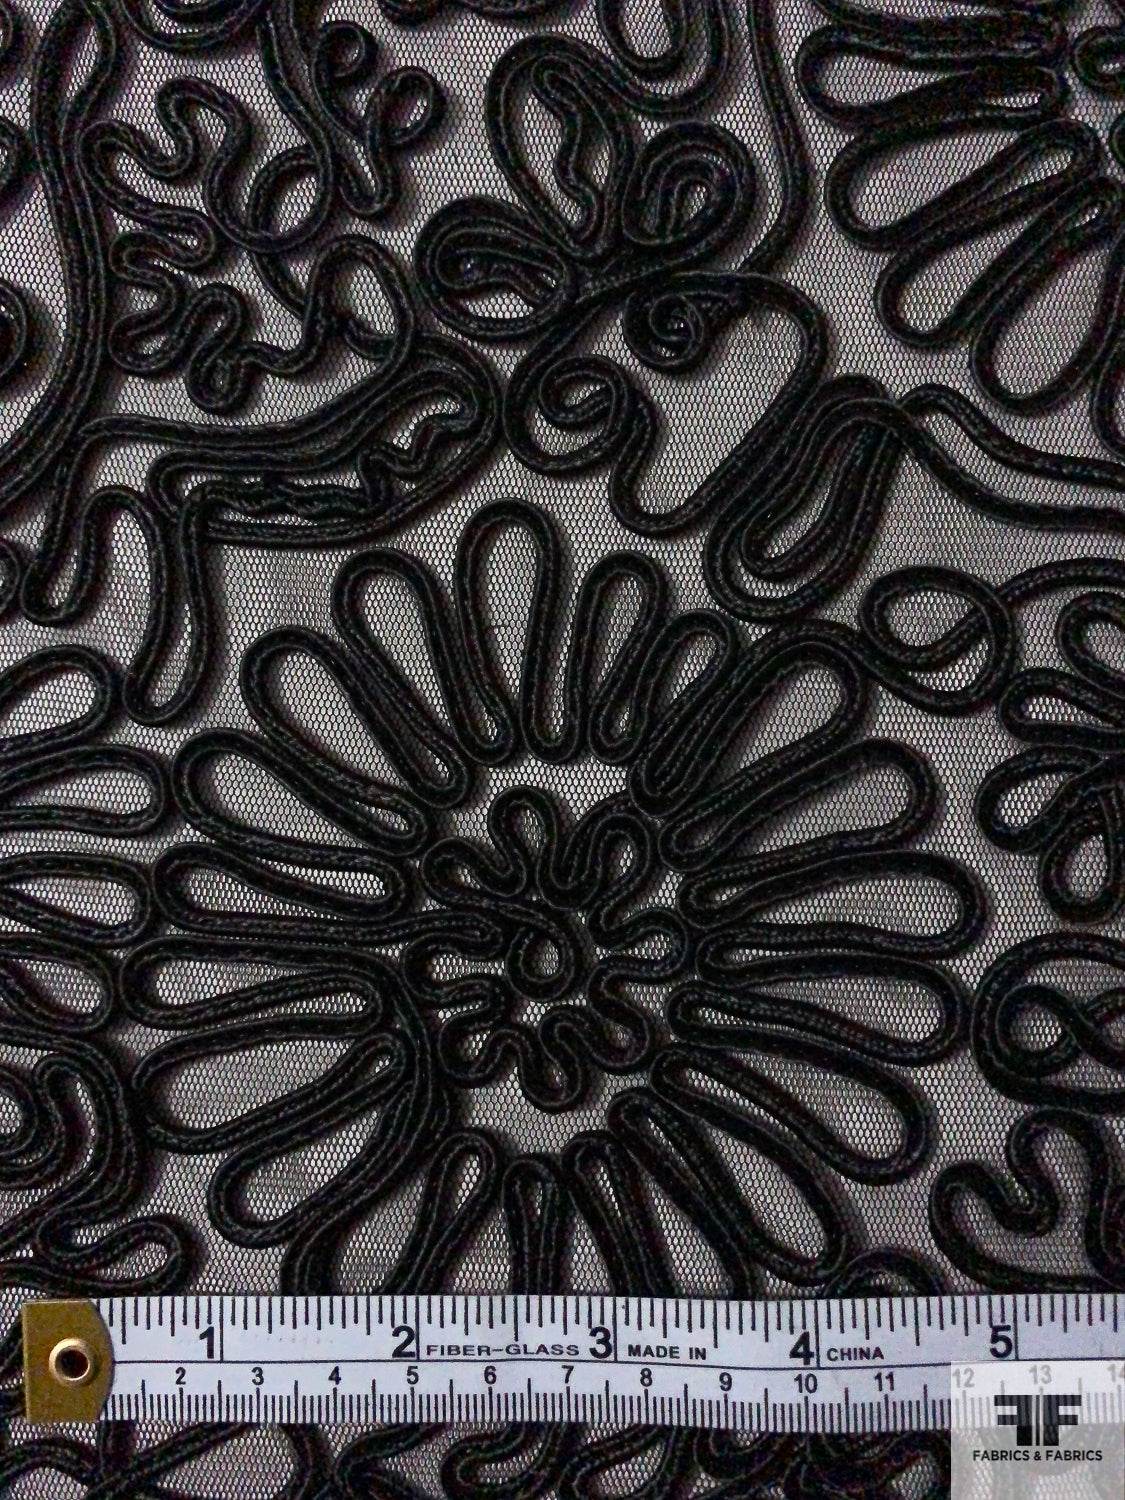 Floral Soutache Embroidered Netting - Black